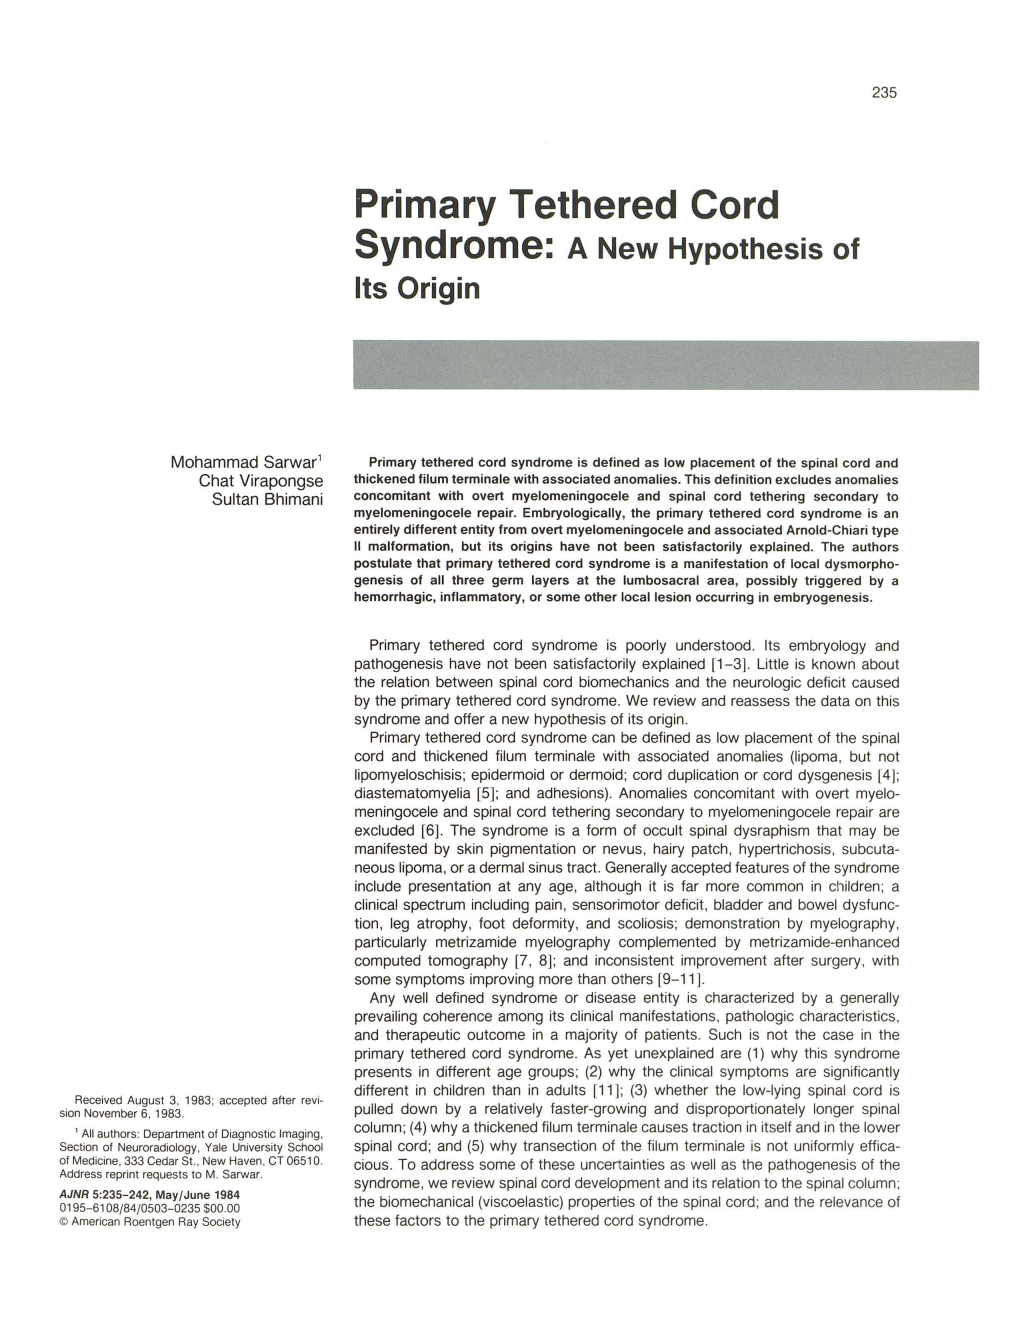 Primary Tethered Cord Syndrome: a New Hypothesis of Its Origin